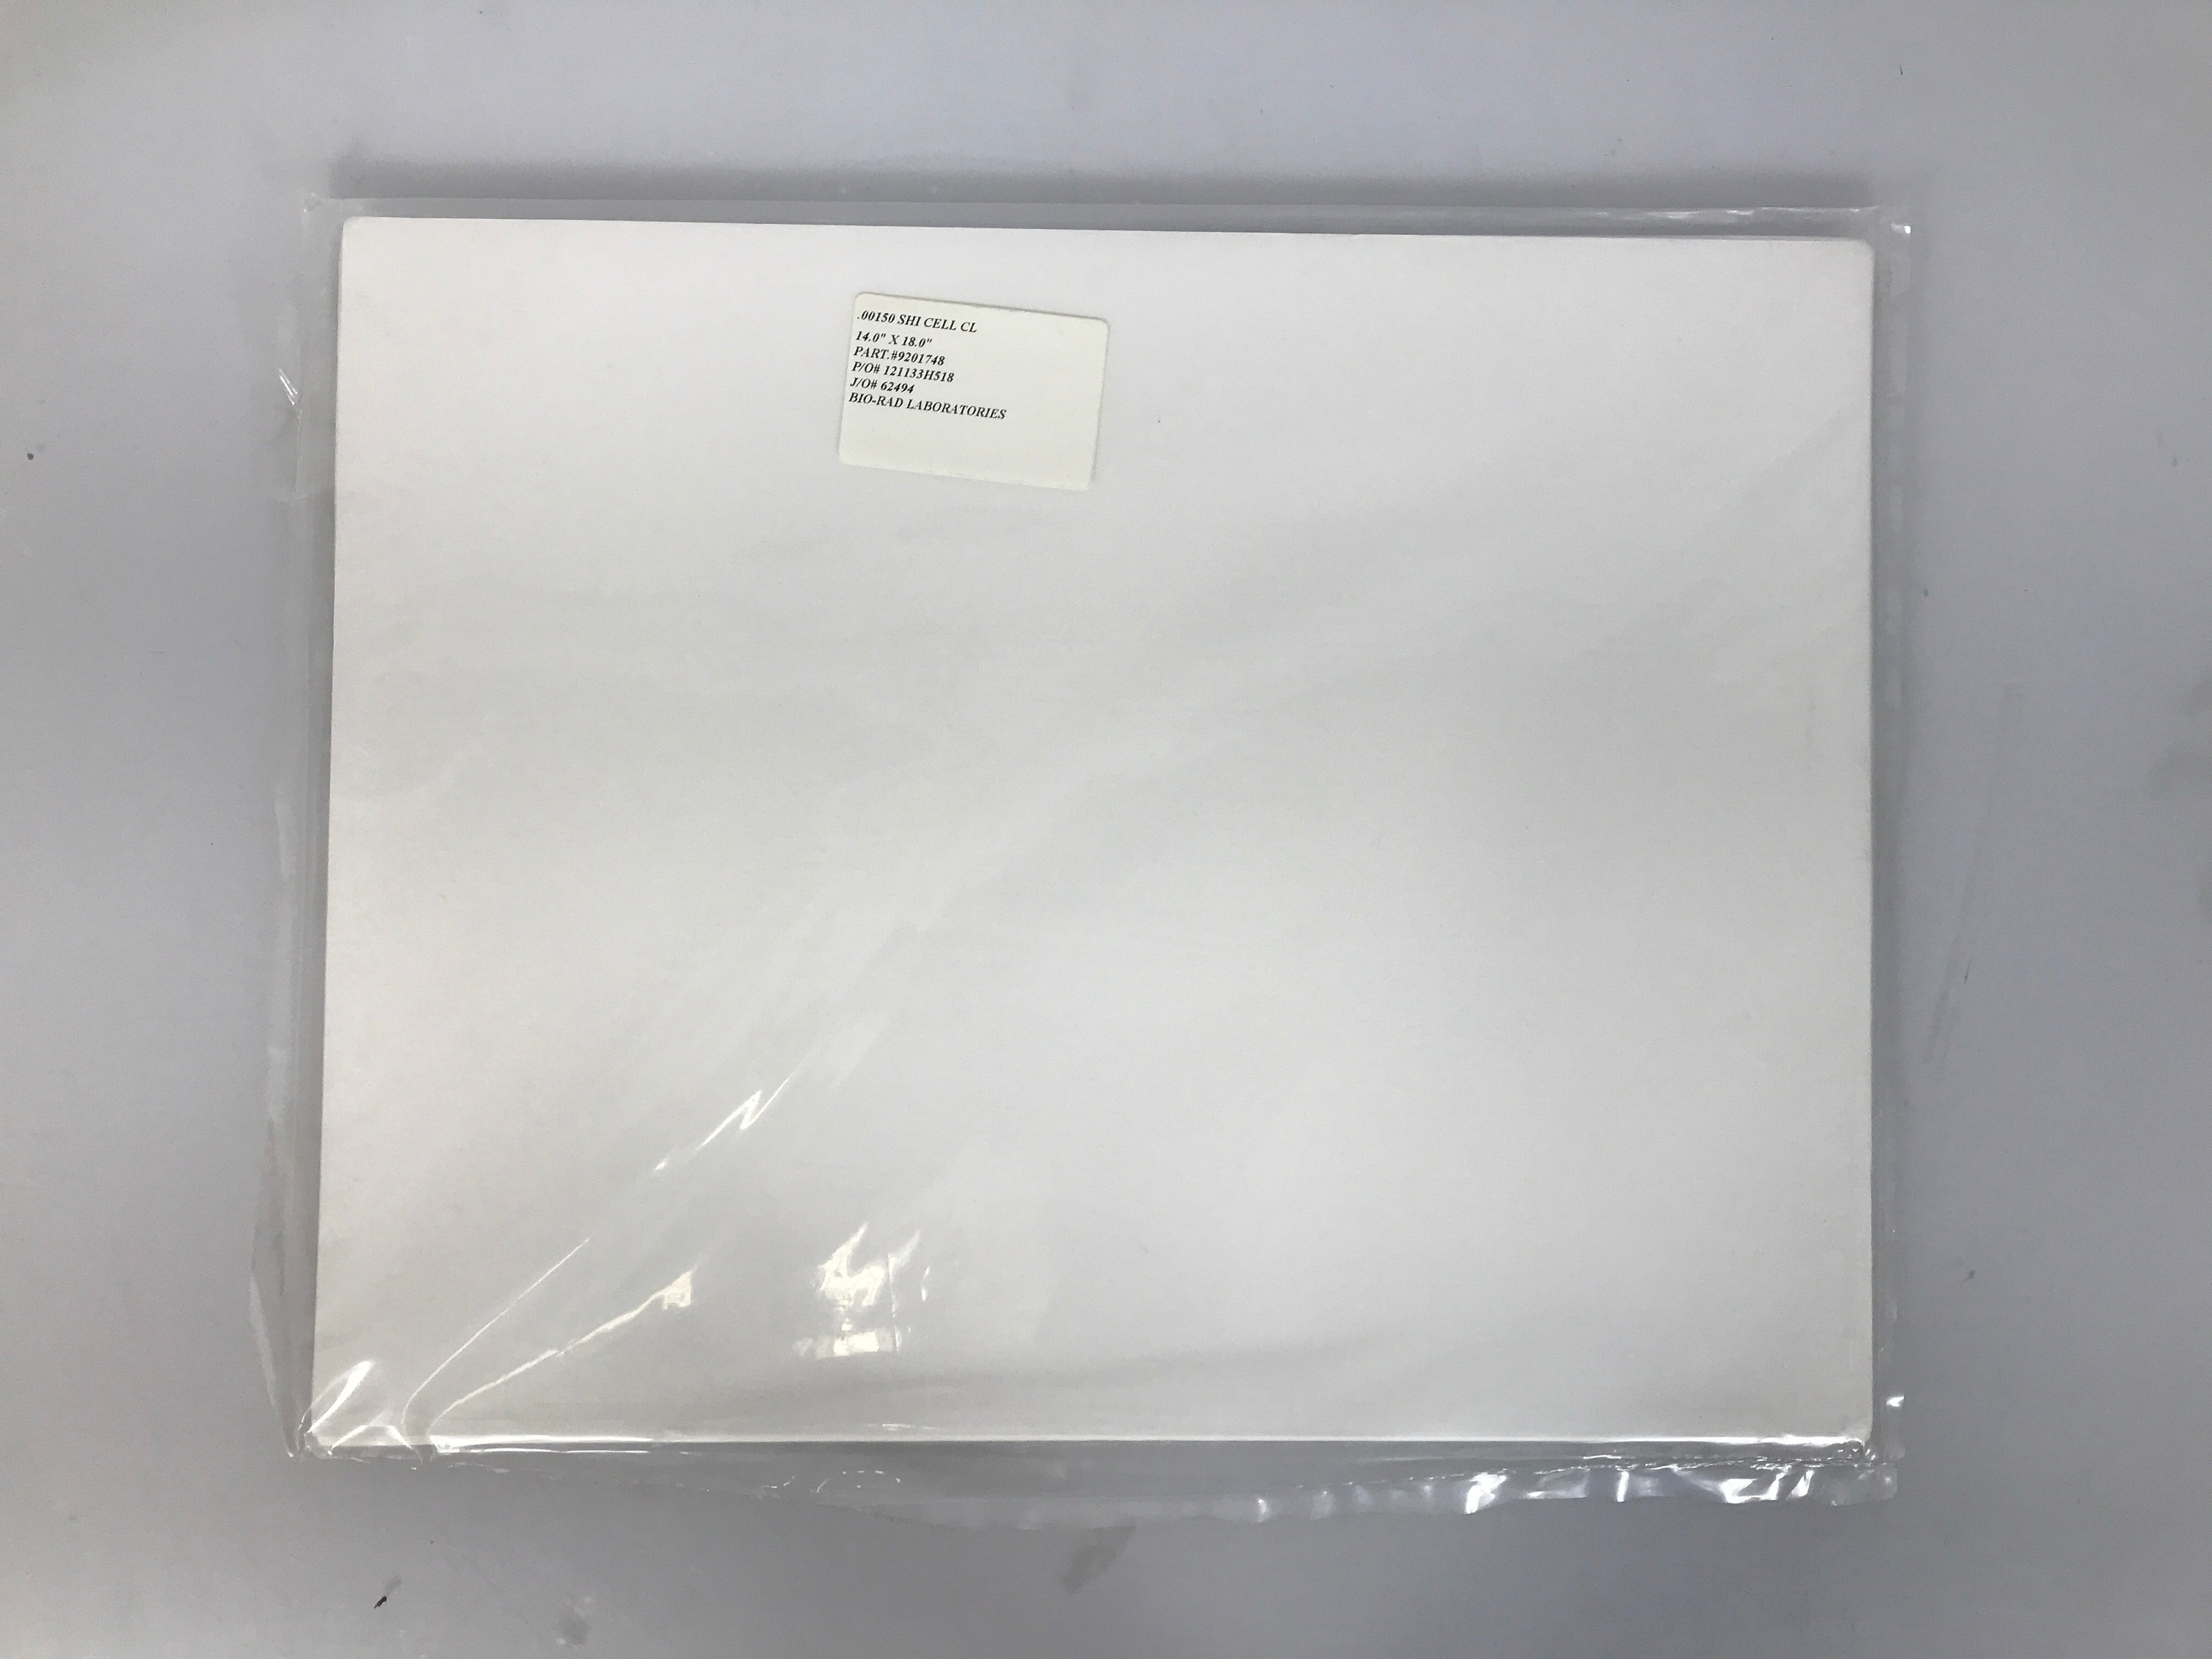 Sealed Package Bio-Rad .00150 SHI CELL CL 14" x 18" Filter Paper